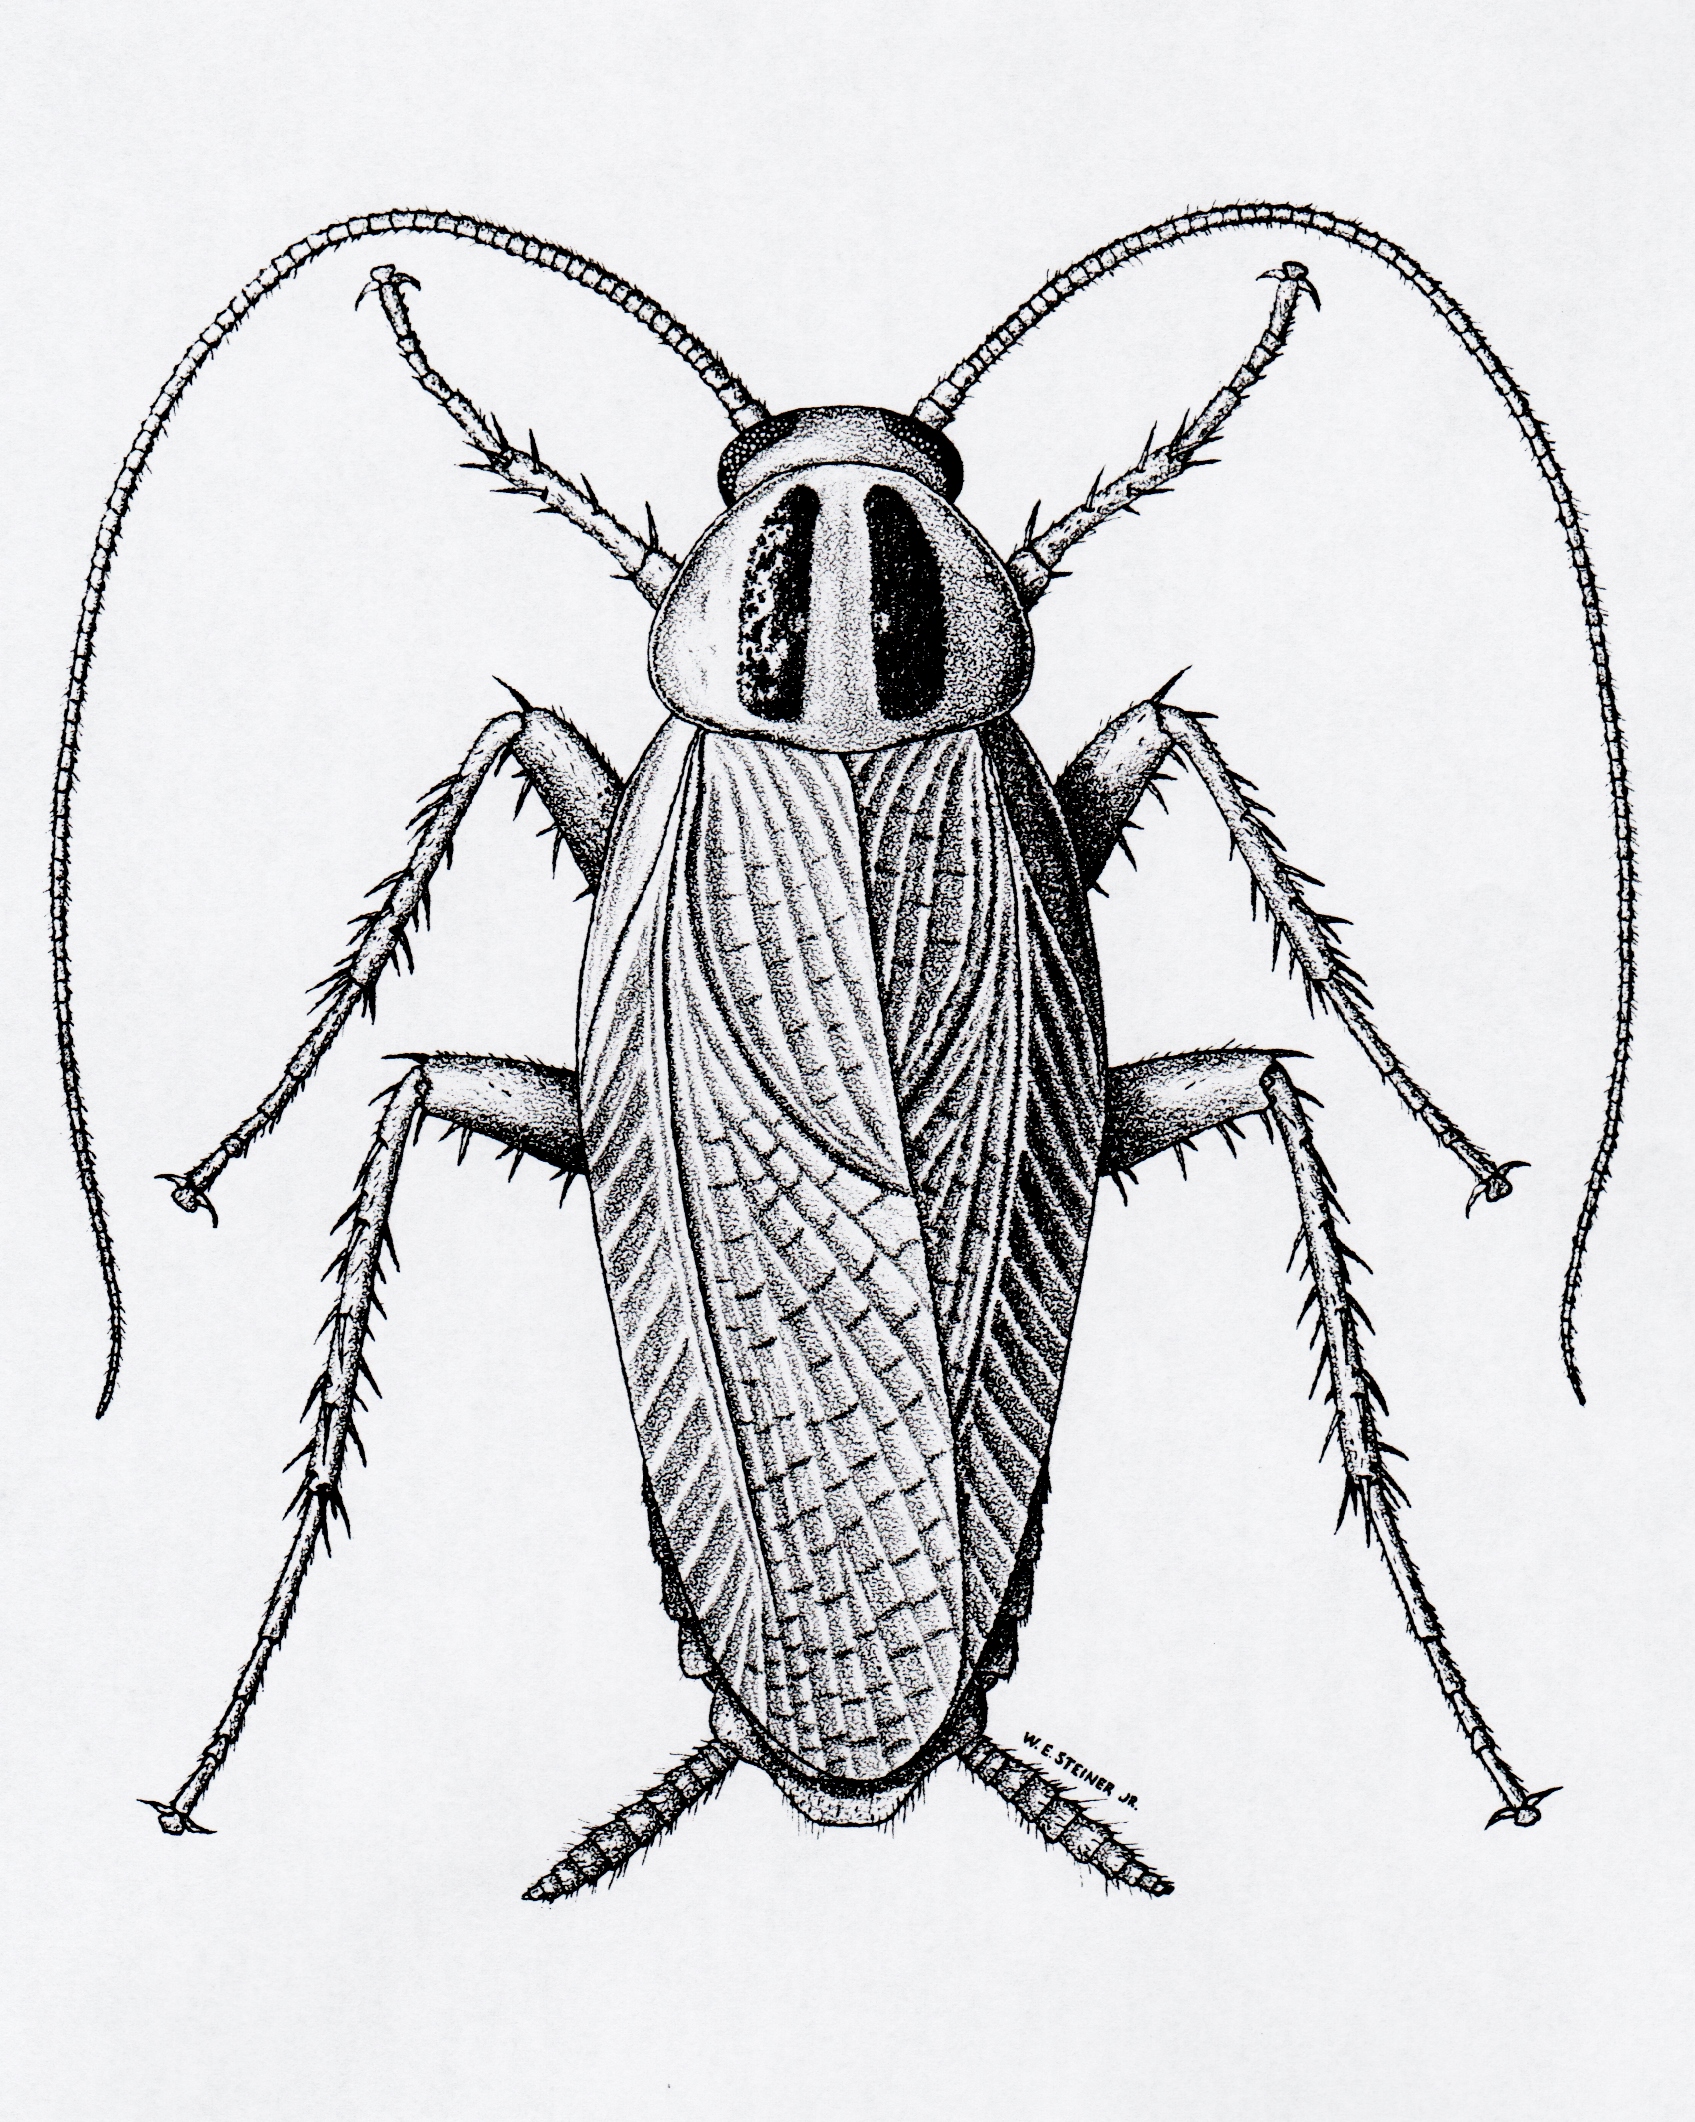 Cockroach Drawing Cute  Cockroach  800x657 PNG Download  PNGkit